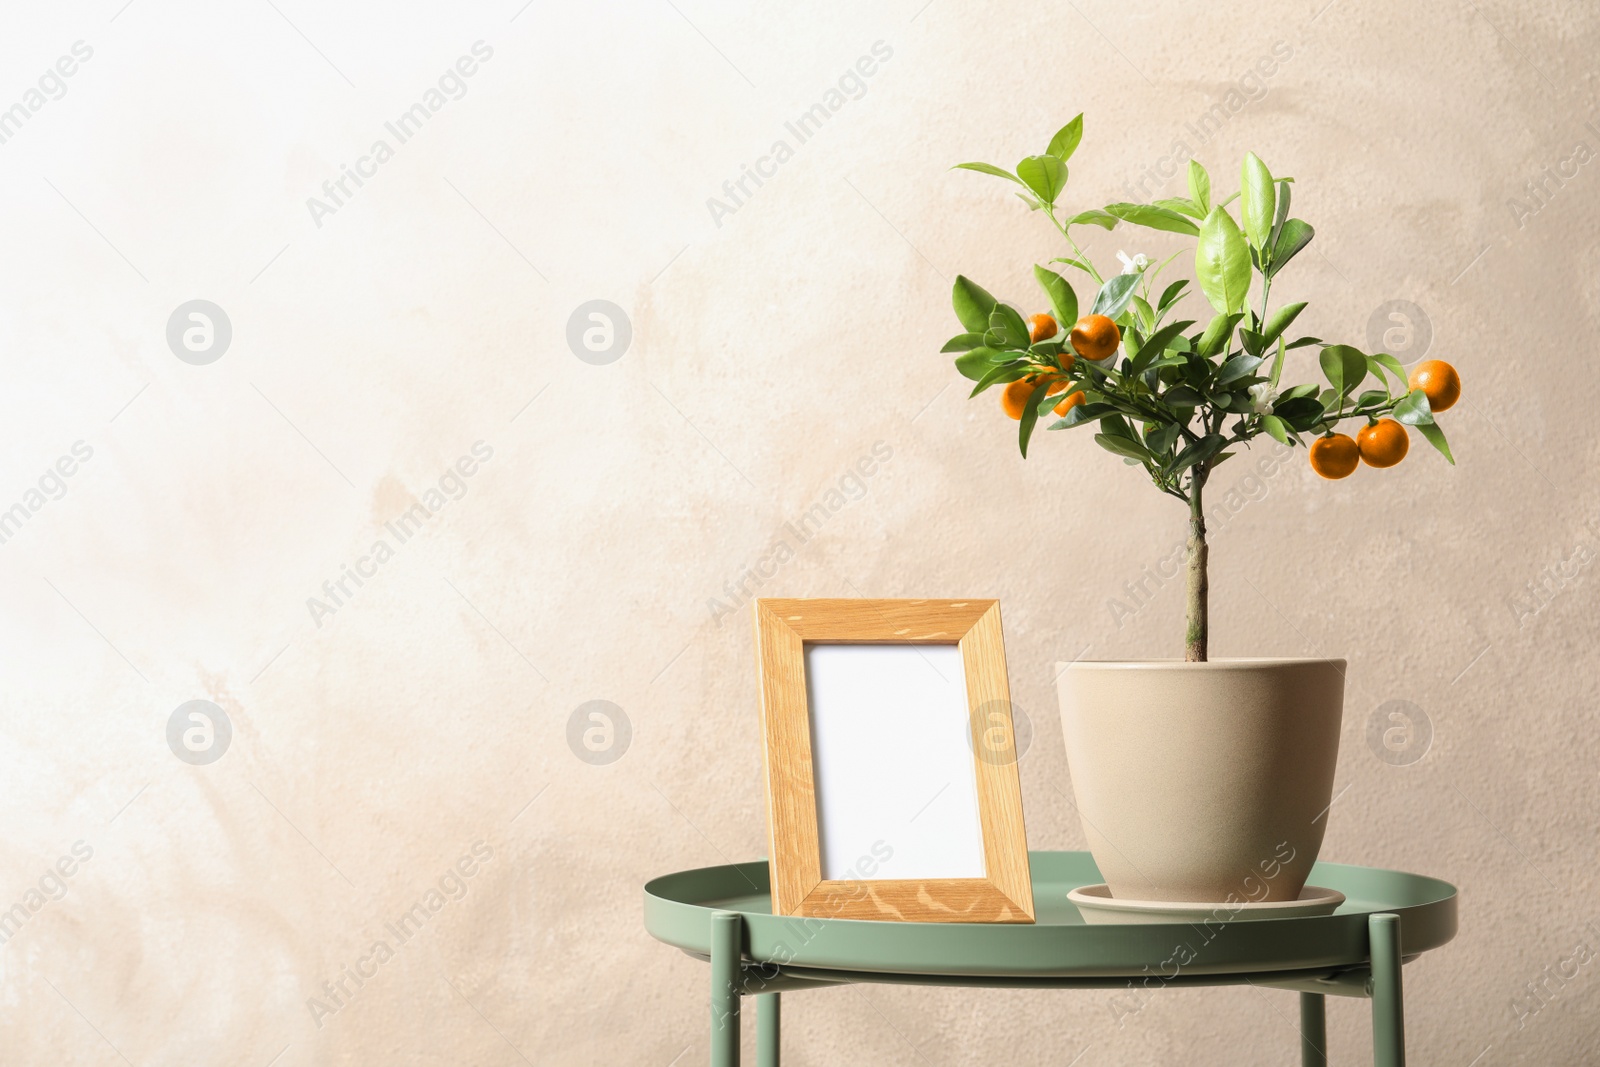 Photo of Potted citrus tree and empty frame on table against color background. Space for text